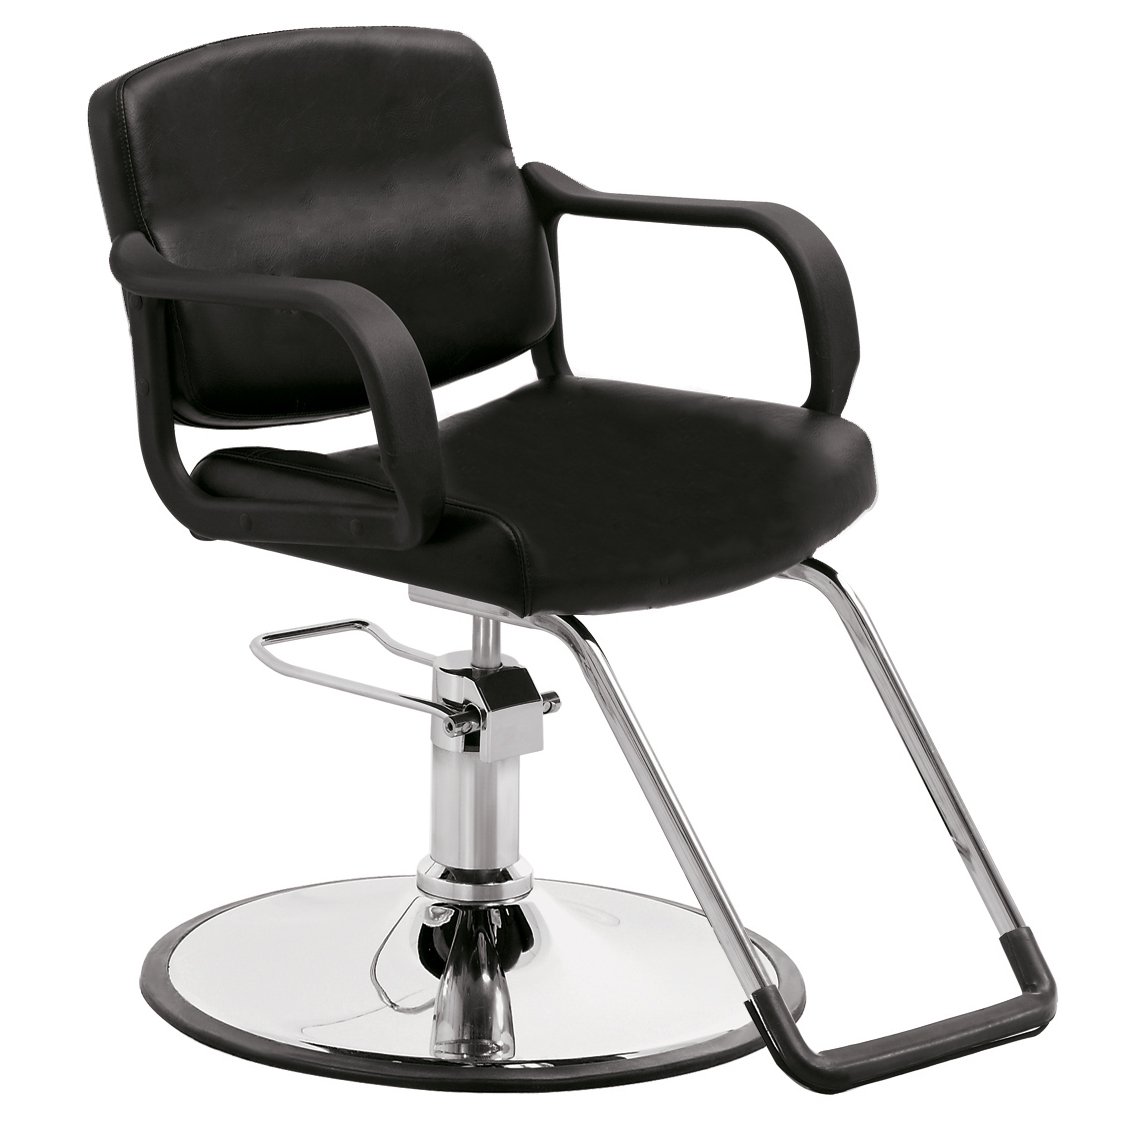 M-270A STYLING CHAIRS SSW 